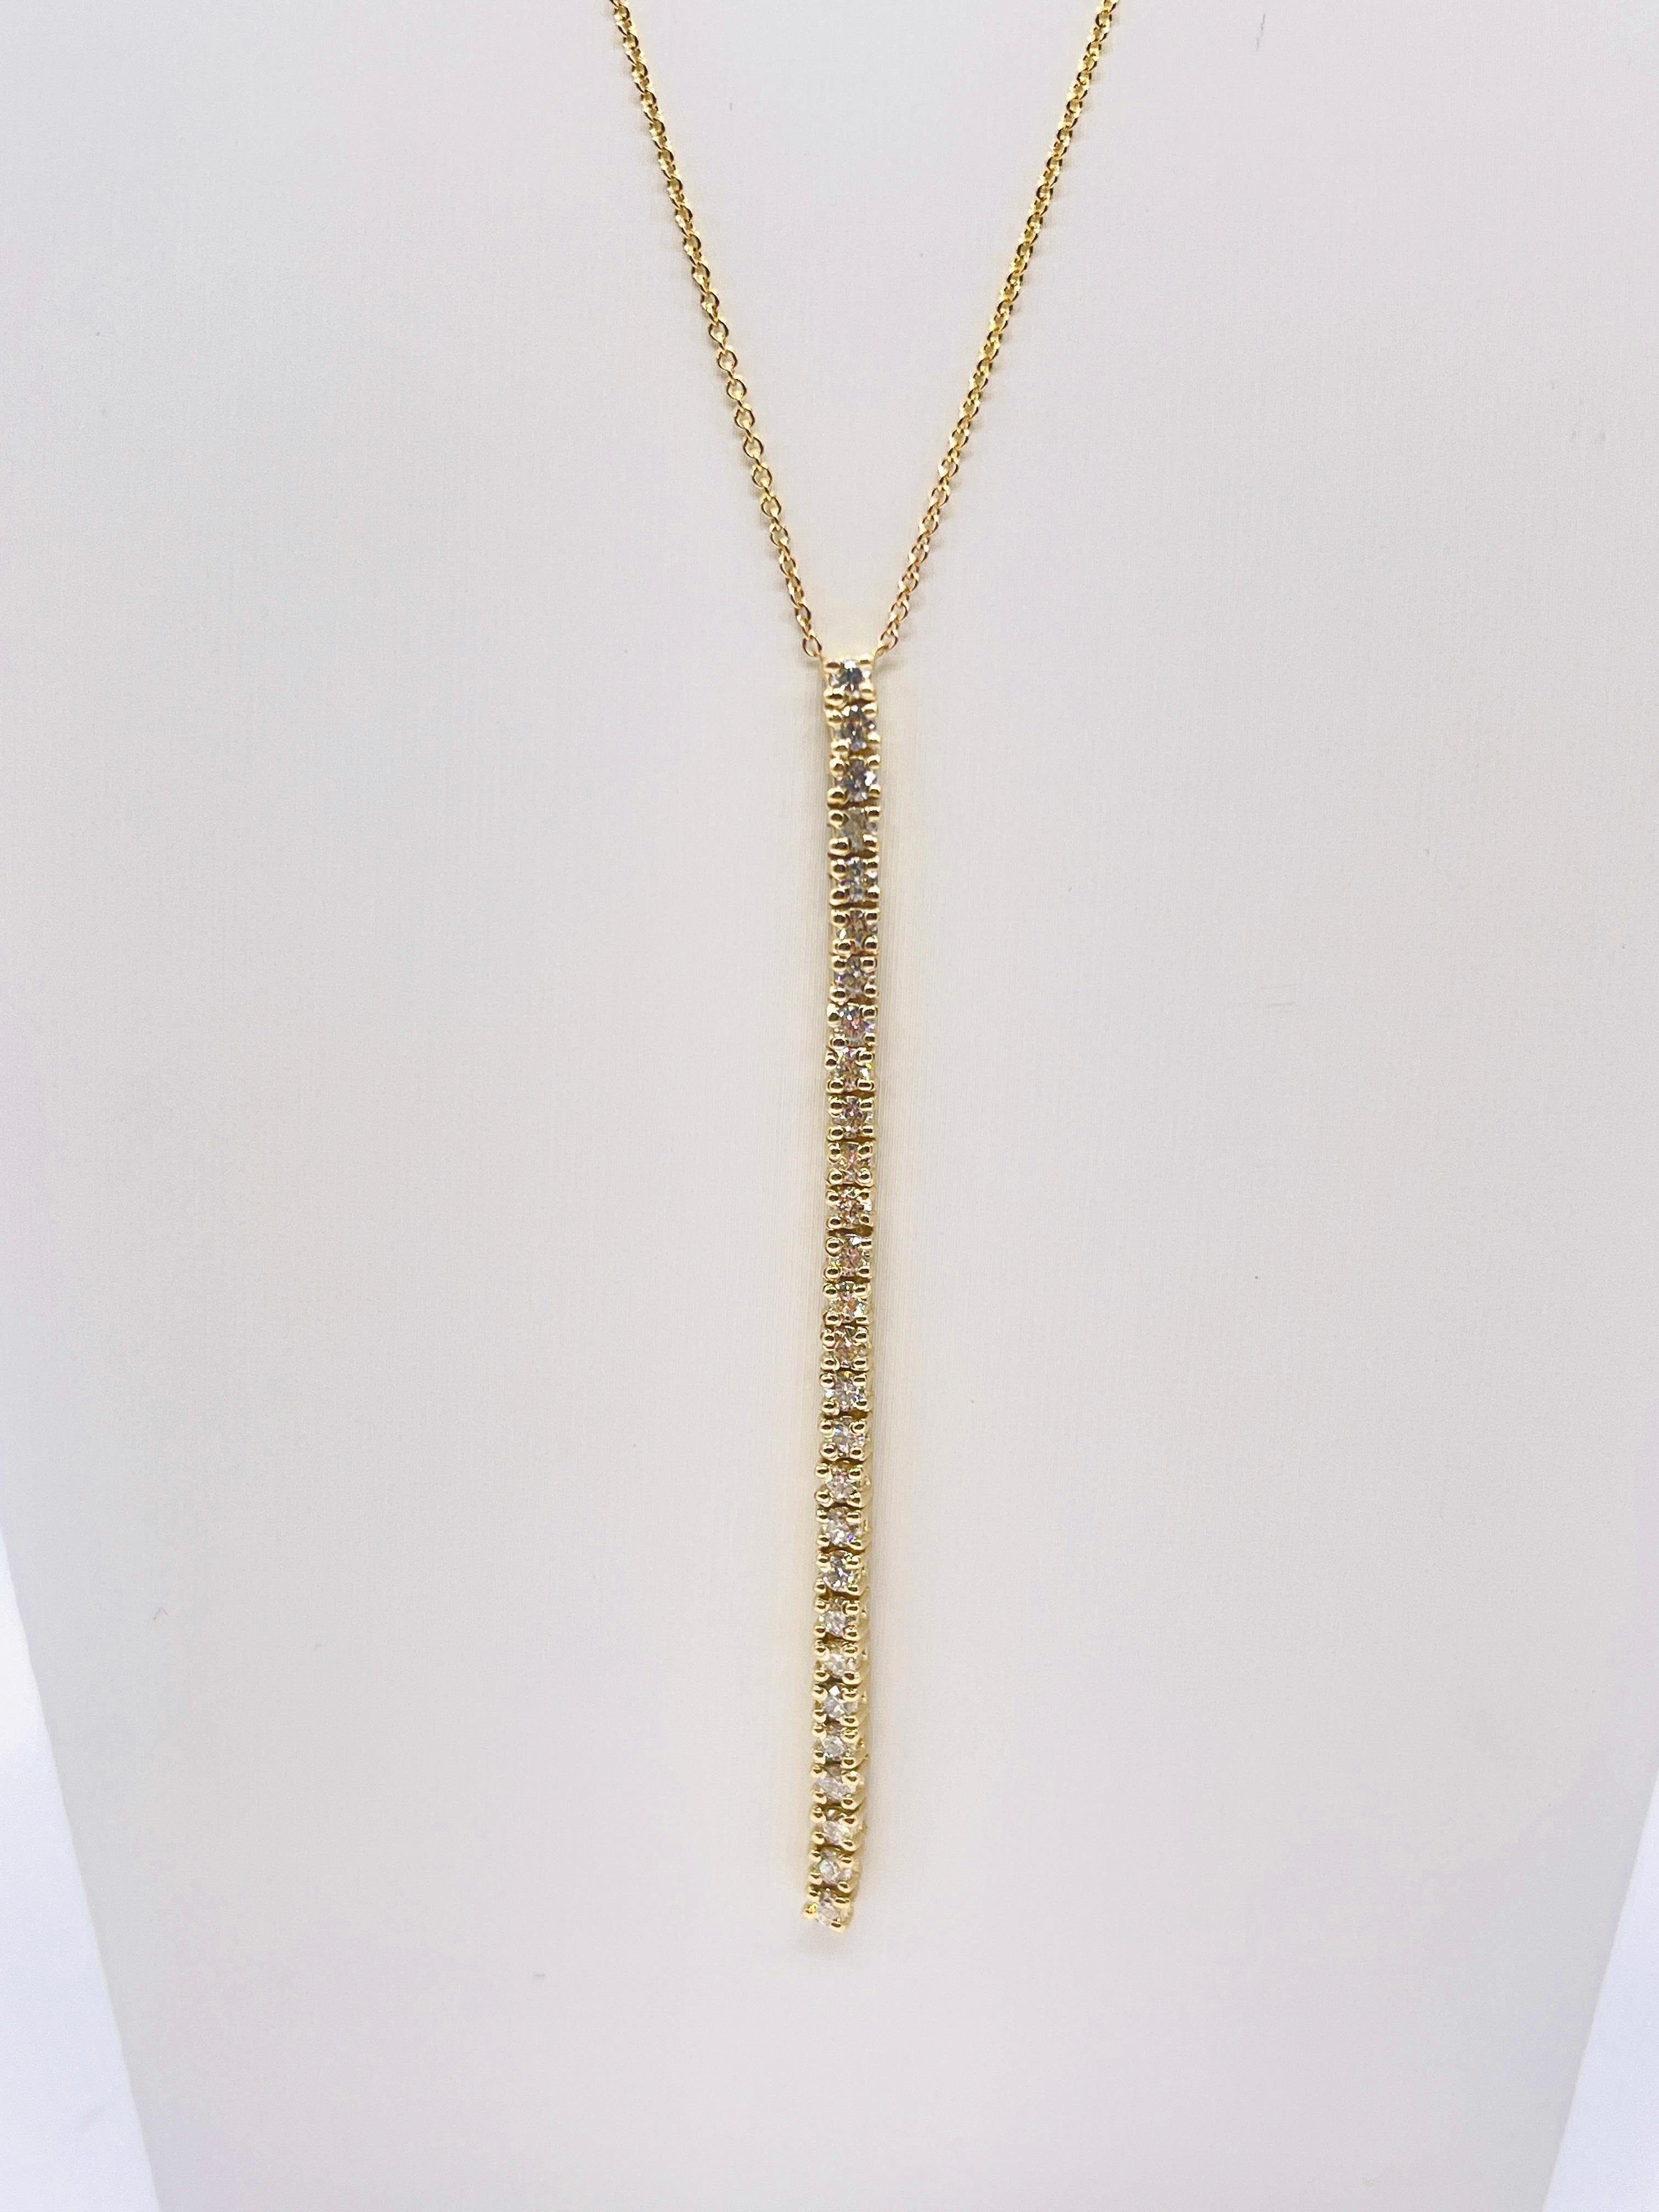 1.55 Carats Natural Diamond Tennis Drop 14k Yellow Gold Necklace In New Condition For Sale In Great Neck, NY